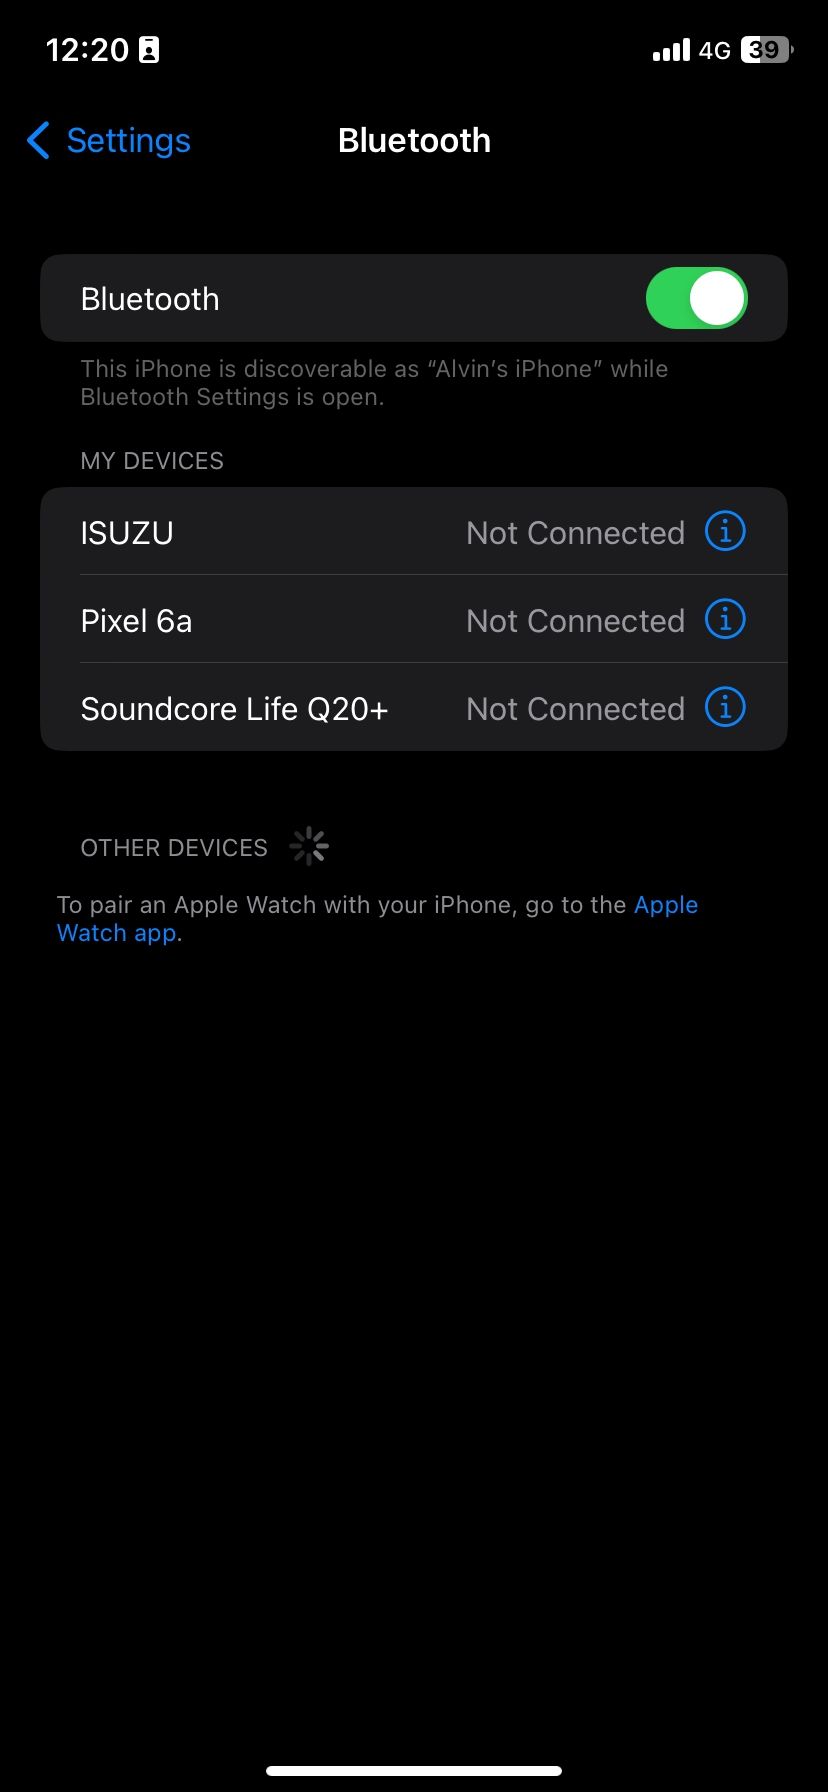 Bluetooth connection enabled on iPhone